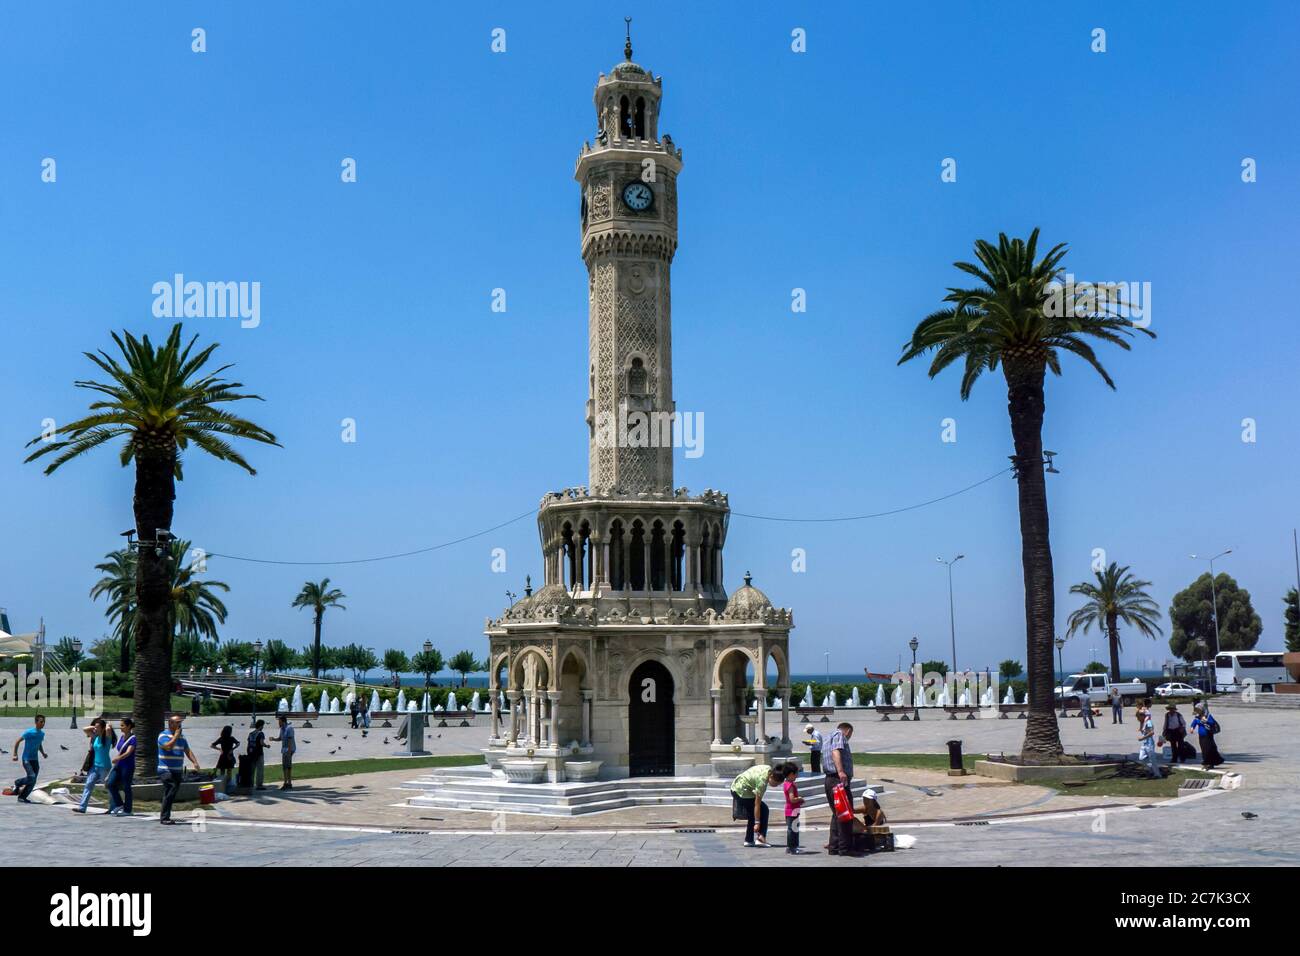 The famous Clock Tower located in Konak Meydani (square) in the Konak district of Izmir in Turkey. It was built in 1901 of Ottoman design. Stock Photo